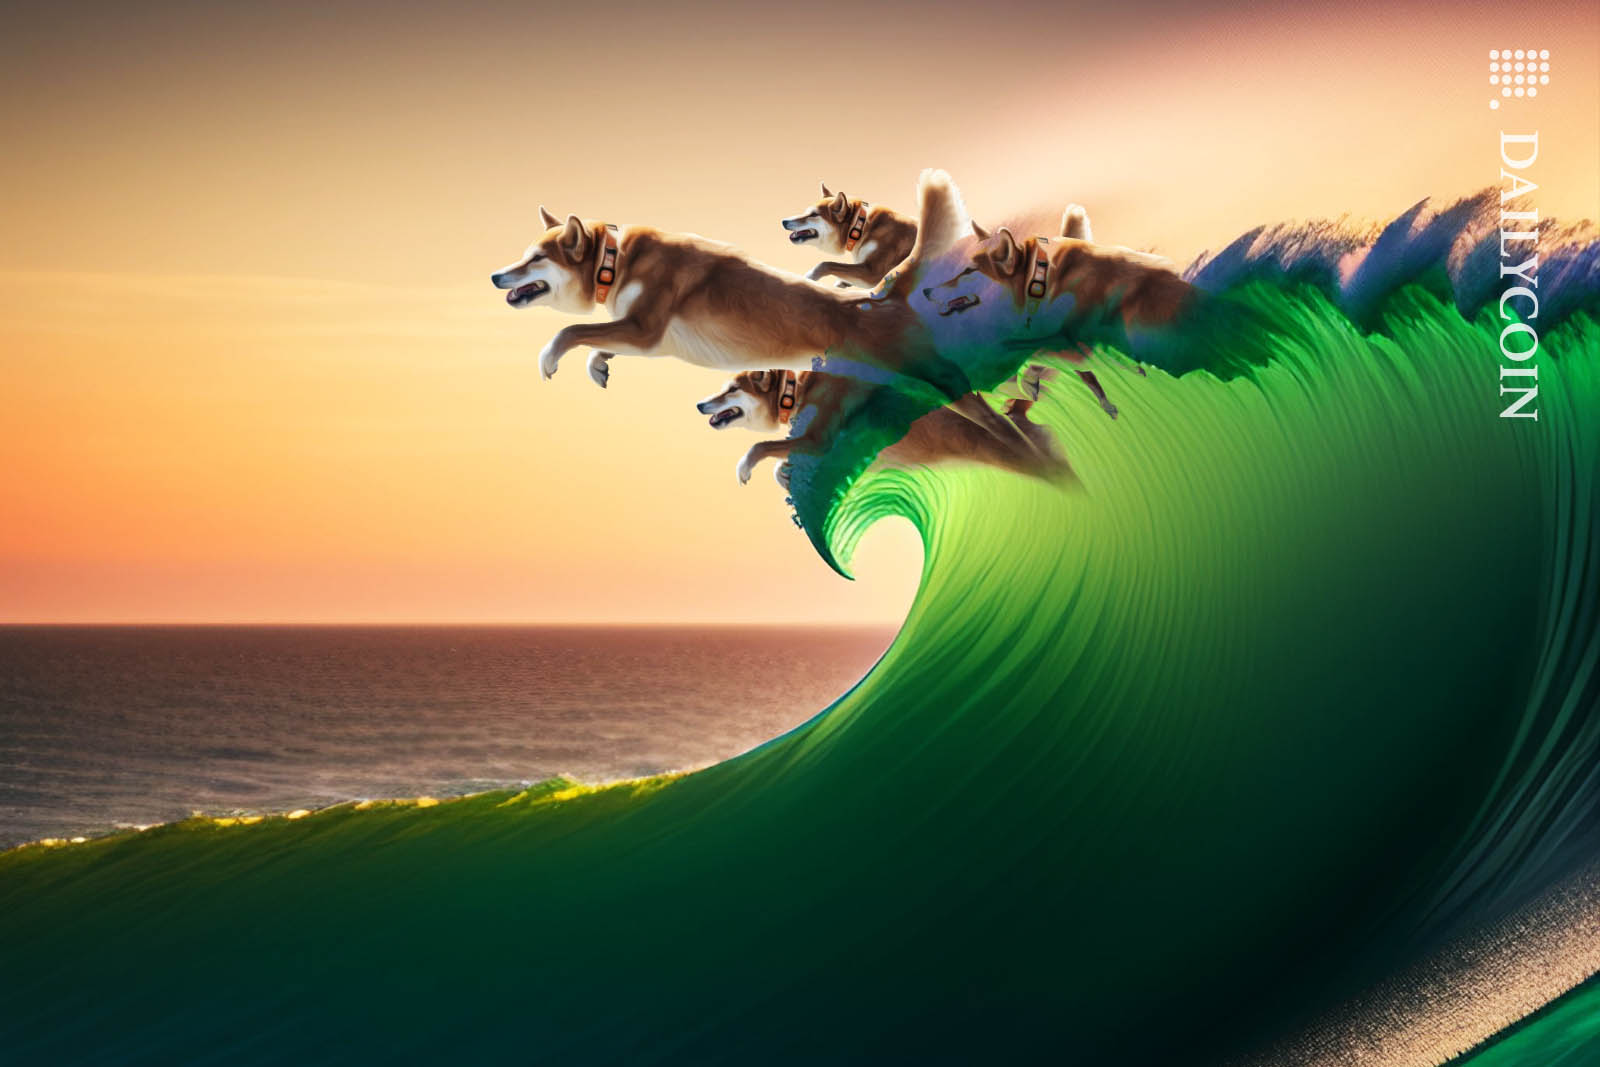 Four Shiba Inus emerging from a giant green wave.